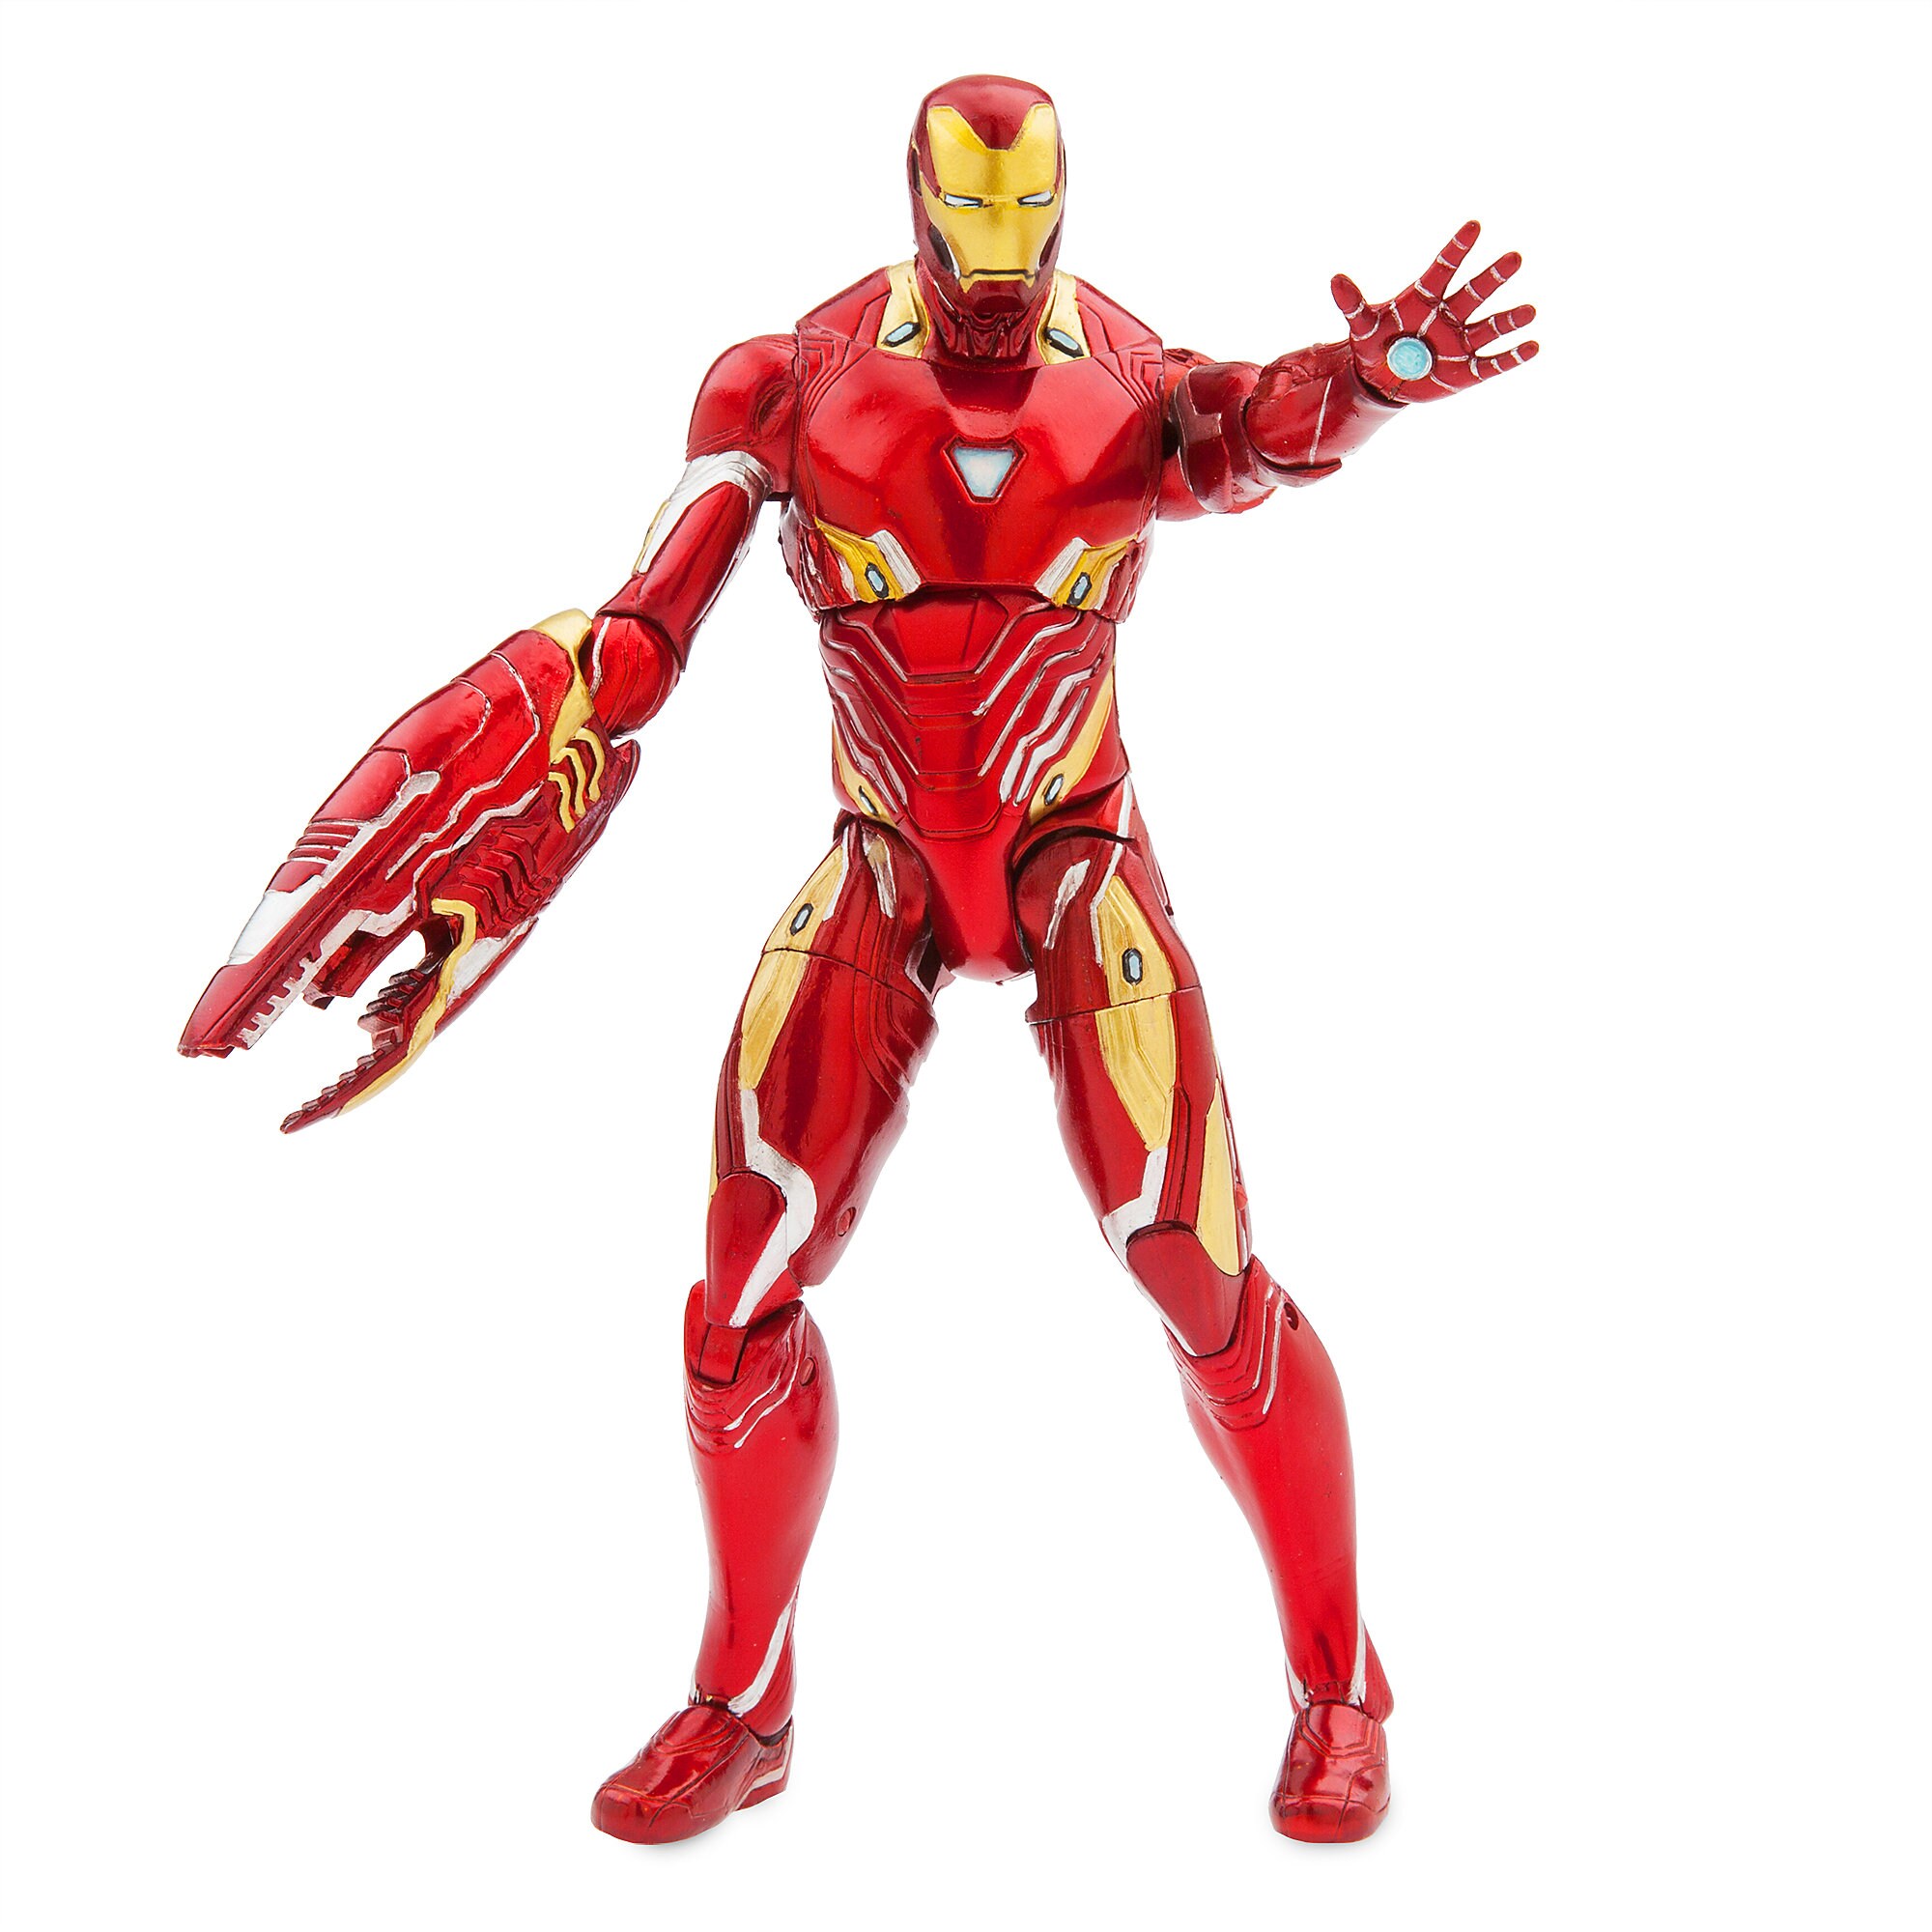 Iron Man Collector Edition Action Figure - Marvel Select